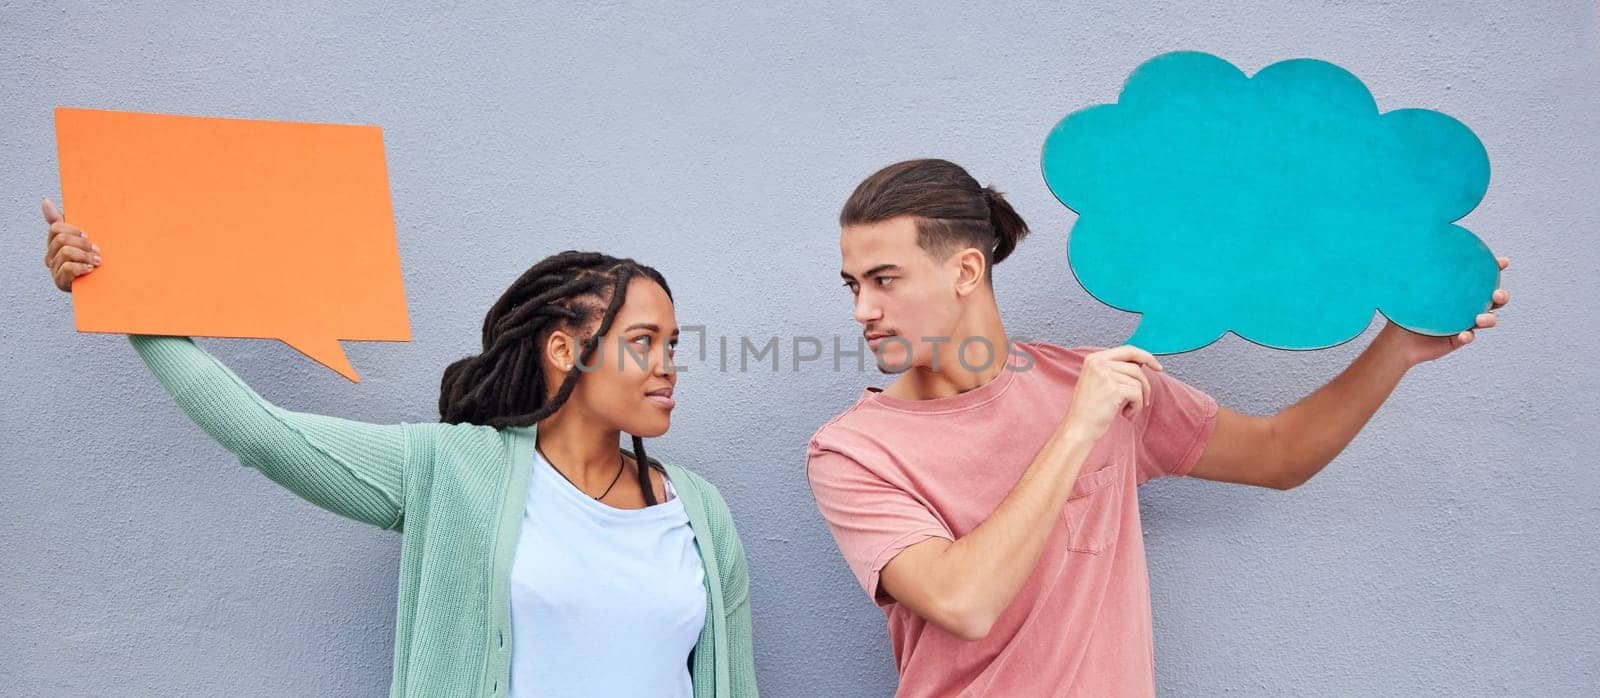 Couple, thinking or speech bubble on isolated background of voice mockup, social media or vote mock up. People, man or black woman on paper poster, marketing billboard or competition feedback review.